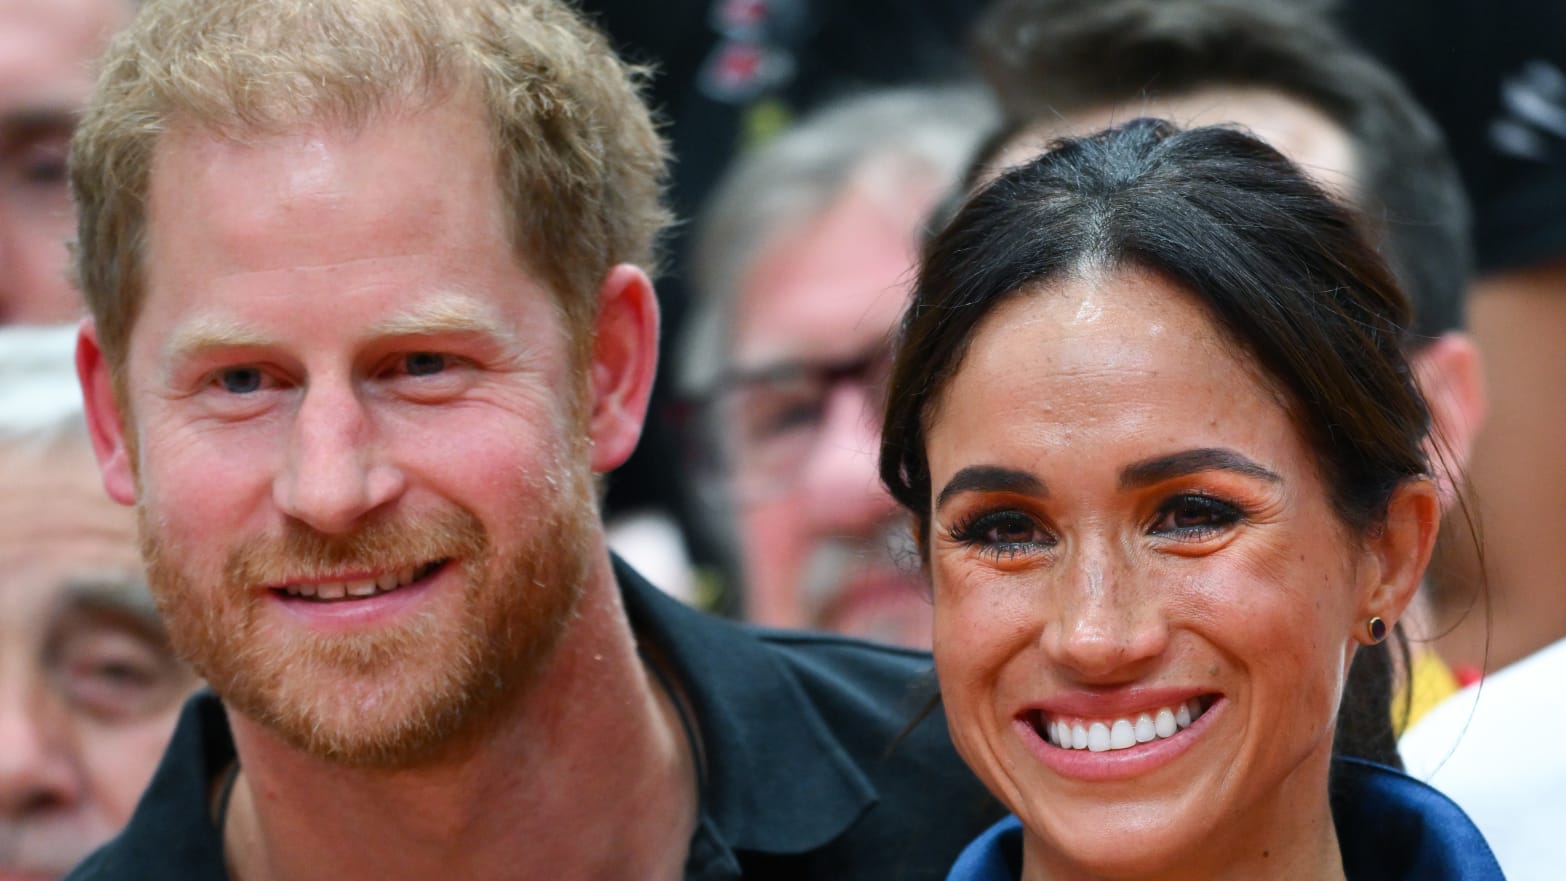 Prince Harry and Meghan Markle have quietly tumbled to the bottom of the royal family’s website.